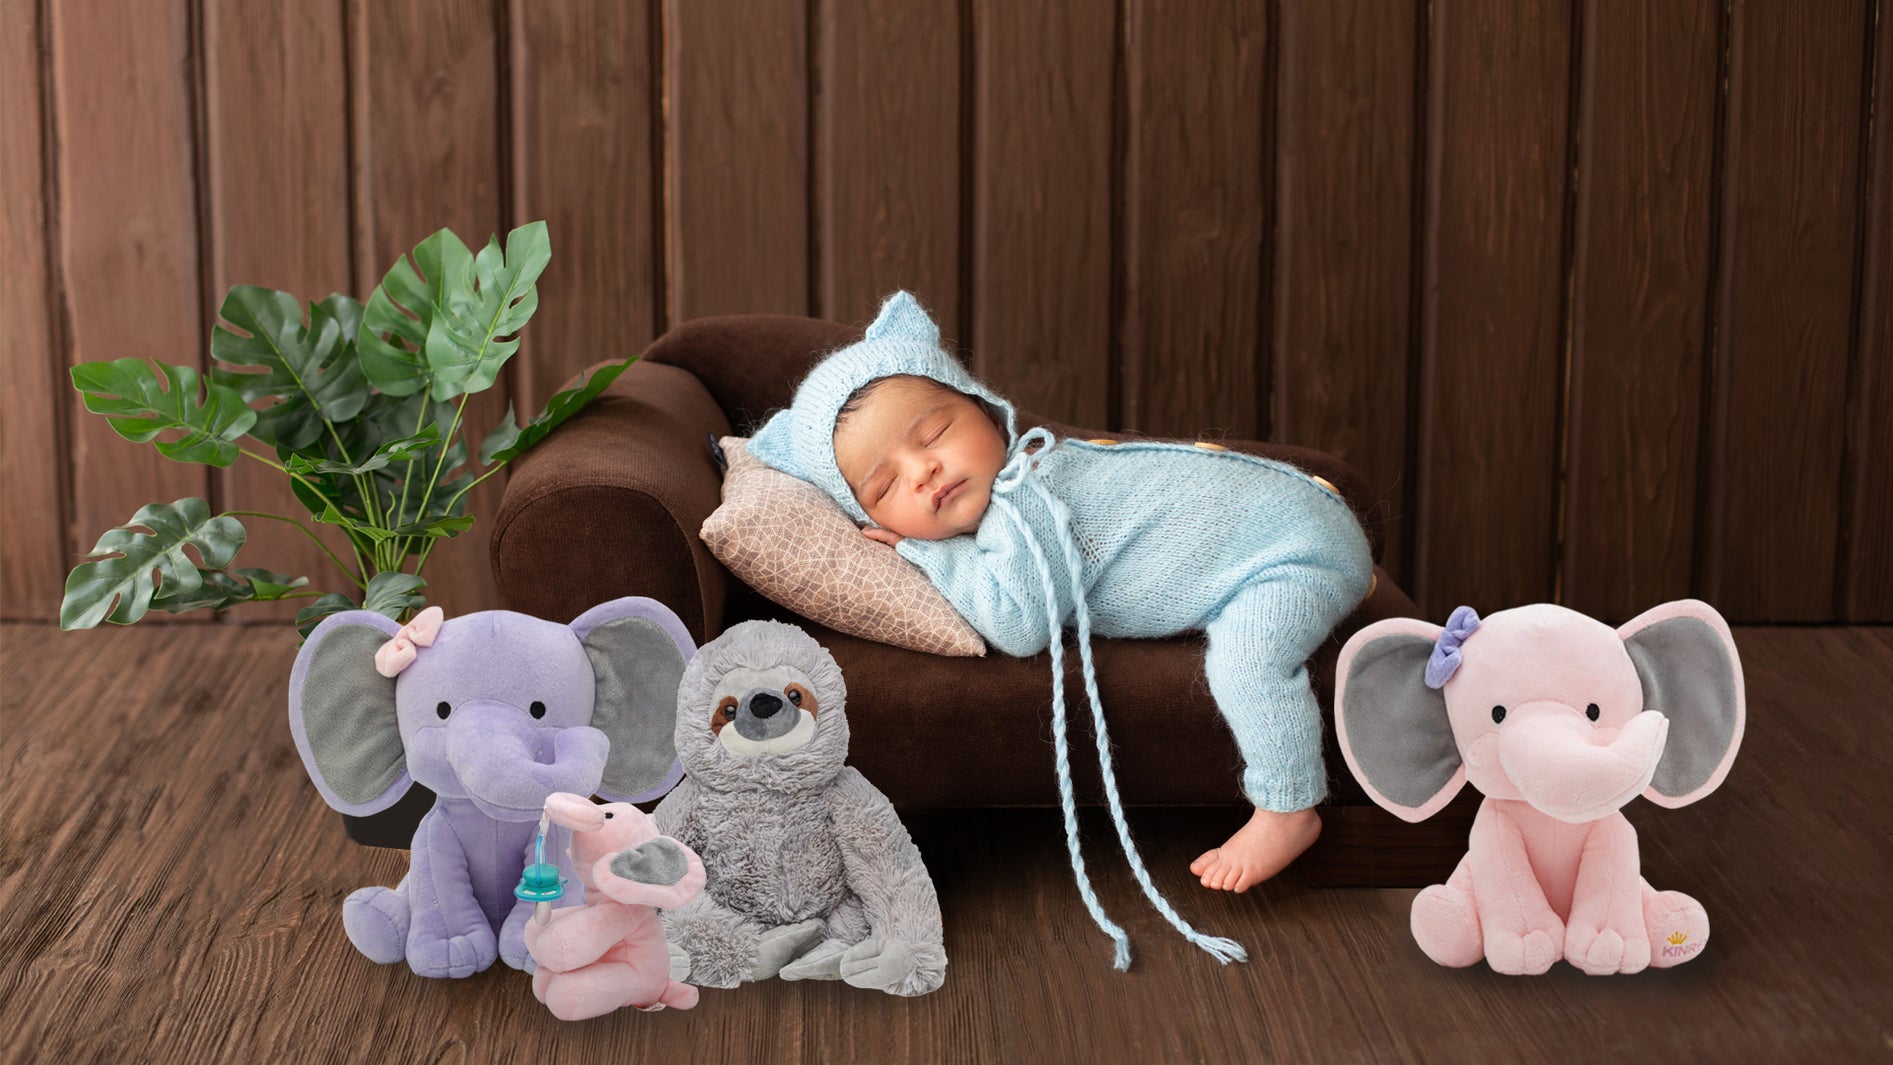 Why a Personalized Stuffed Elephant for Baby is the Answer to All Your Gift Worries?